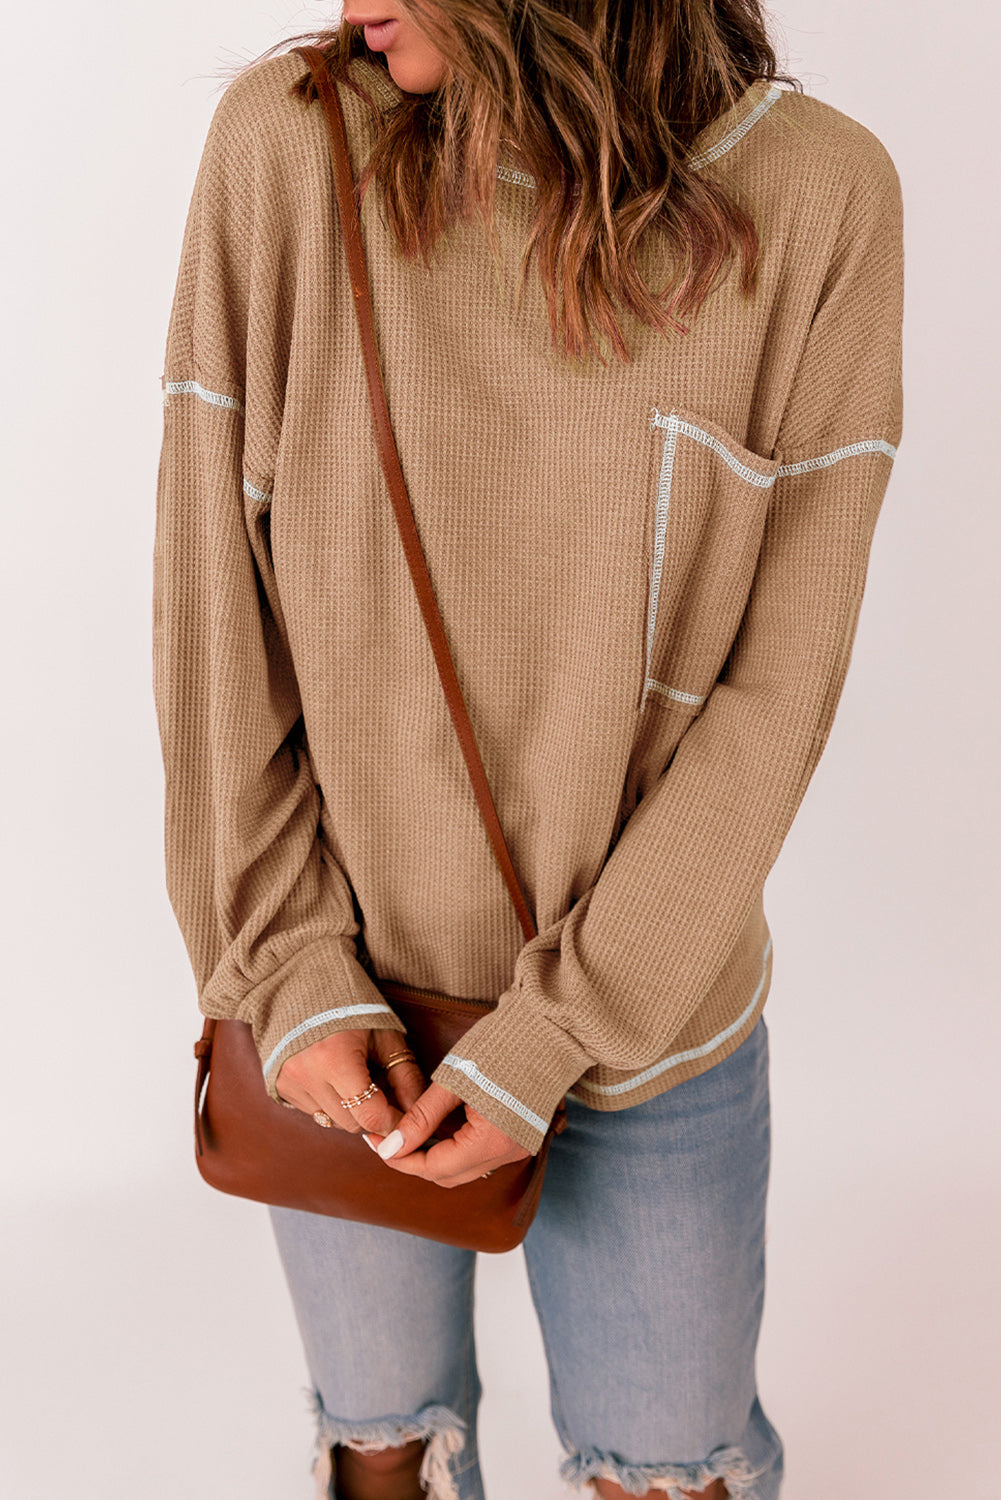 Contrast Stitching Waffle Knit Top